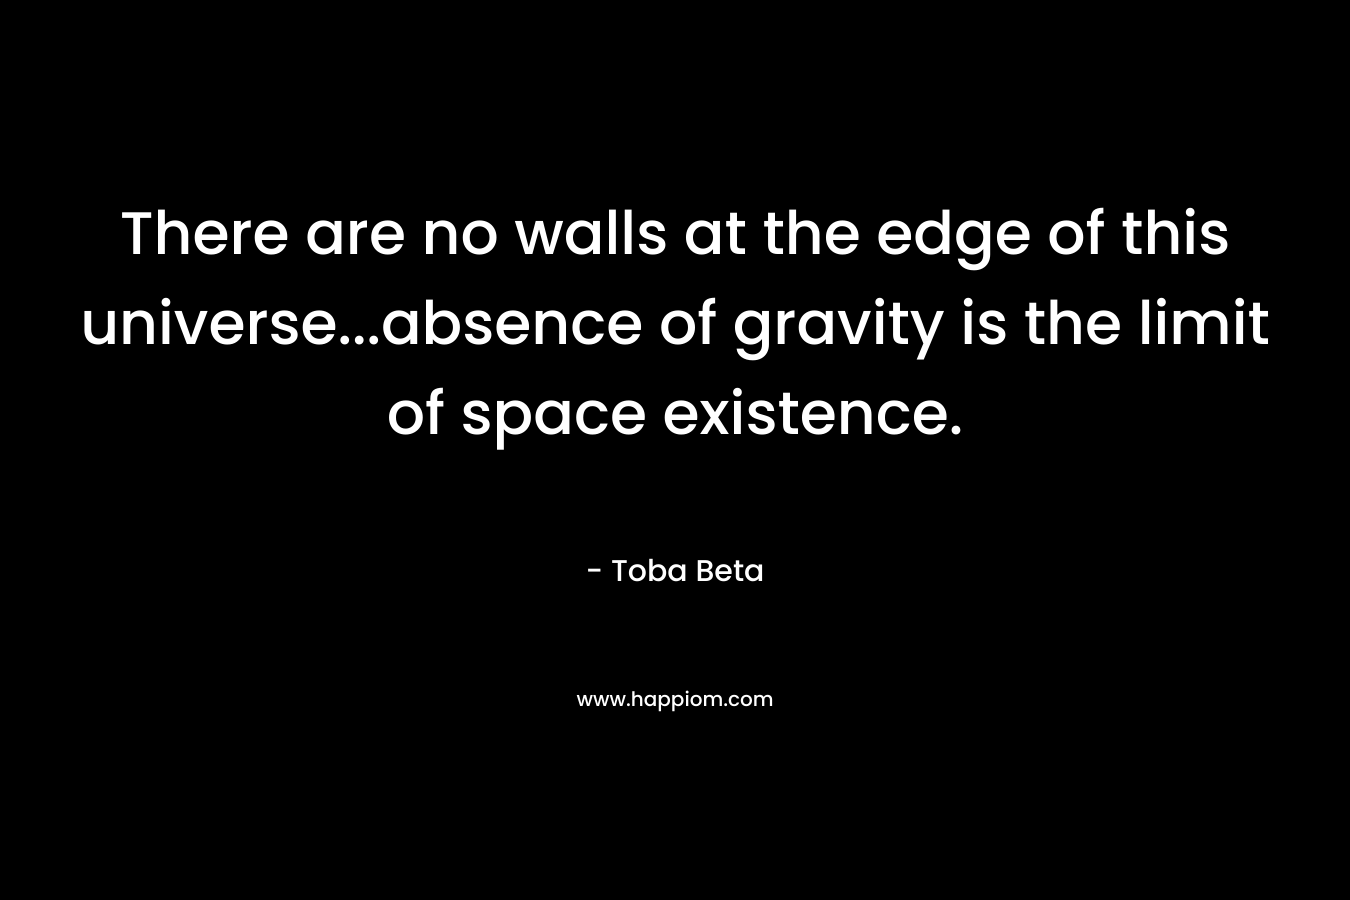 There are no walls at the edge of this universe...absence of gravity is the limit of space existence.